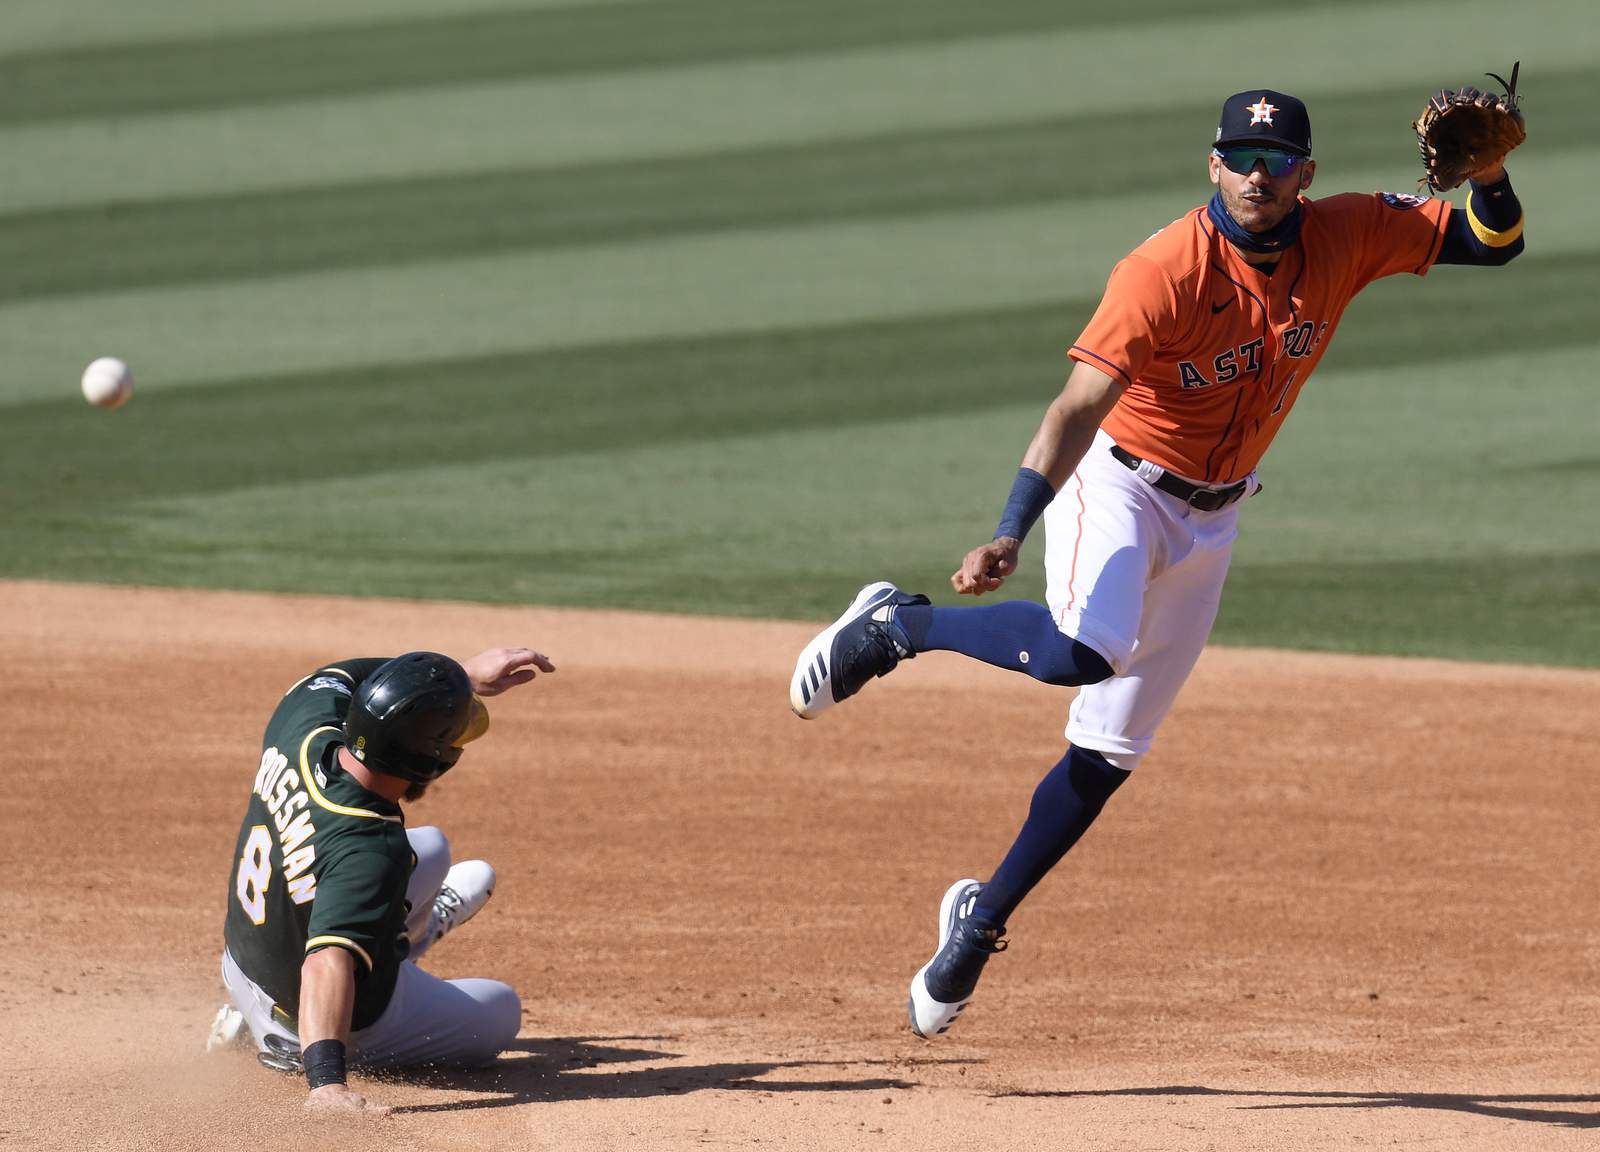 Astros fall to Athletics, 9-7, in Game 3 of the ALDS